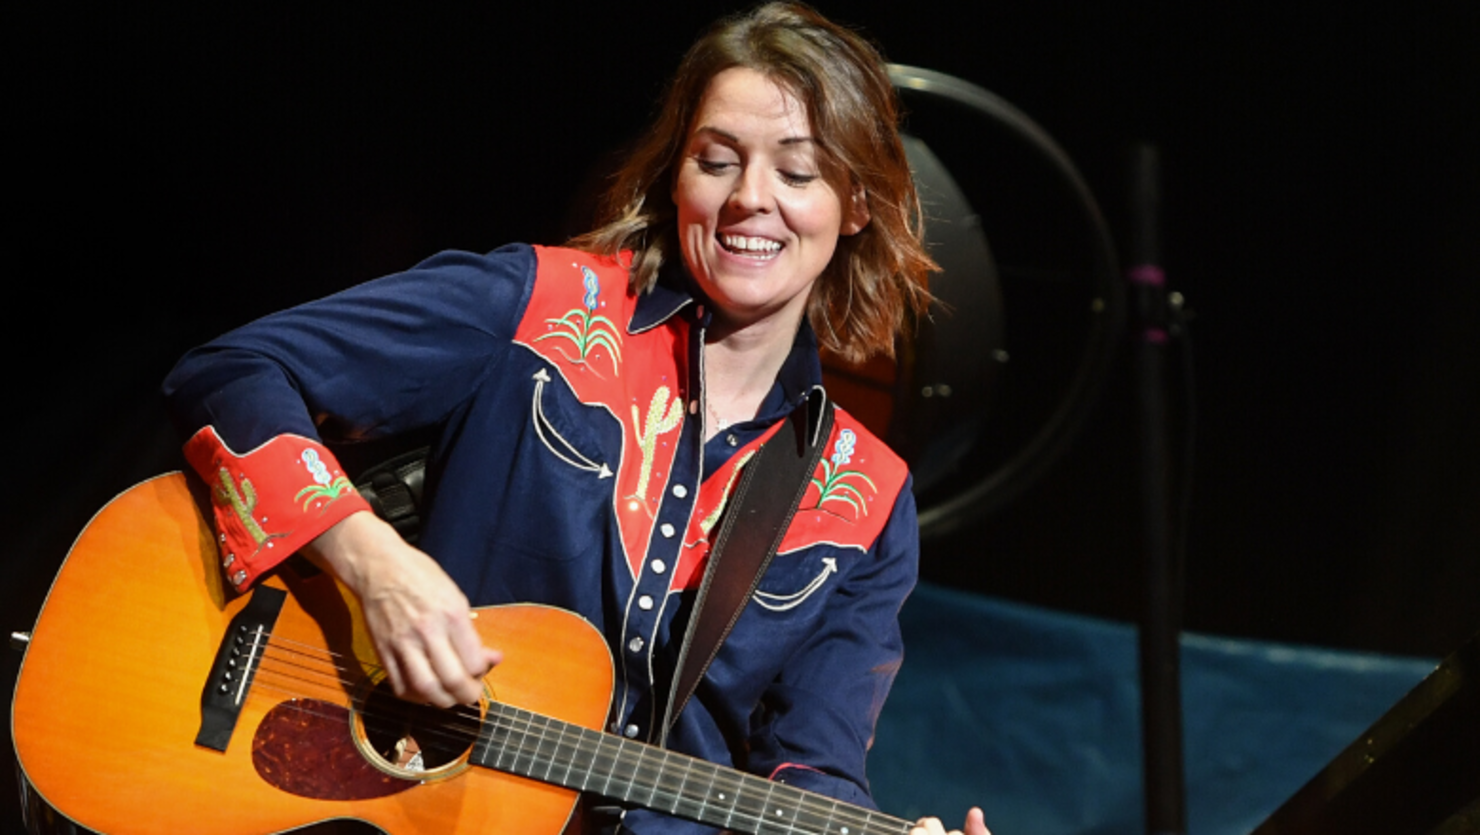 Brandi Carlile To Receive Impact Award At CMT's Next Women Of Country Event